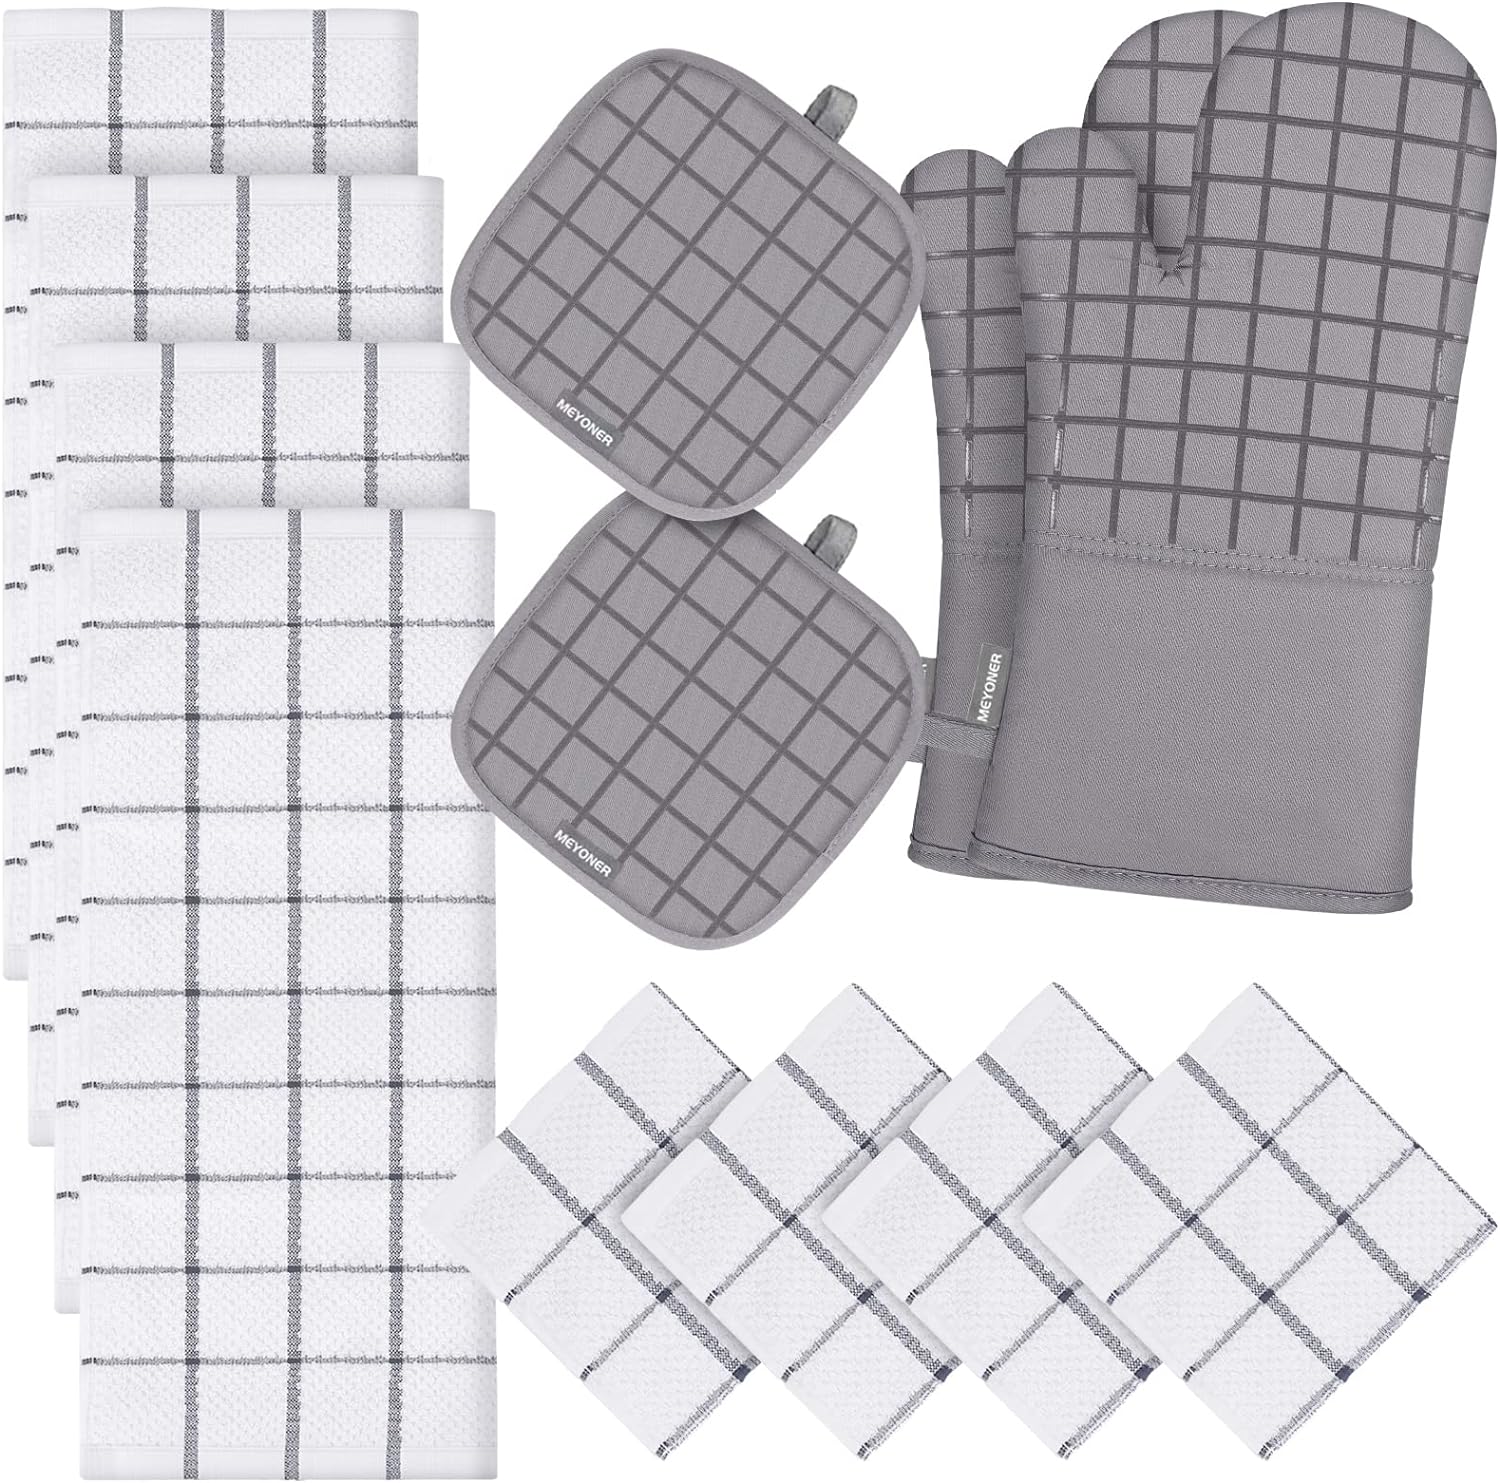 Oven Mitts and Pot Holders Set 500 Degree Heat Resistant Oven Gloves and Hot Pads, Premium Soft Cotton Kitchen Hand Towels and Dish Cloth Hanging Loop Gray